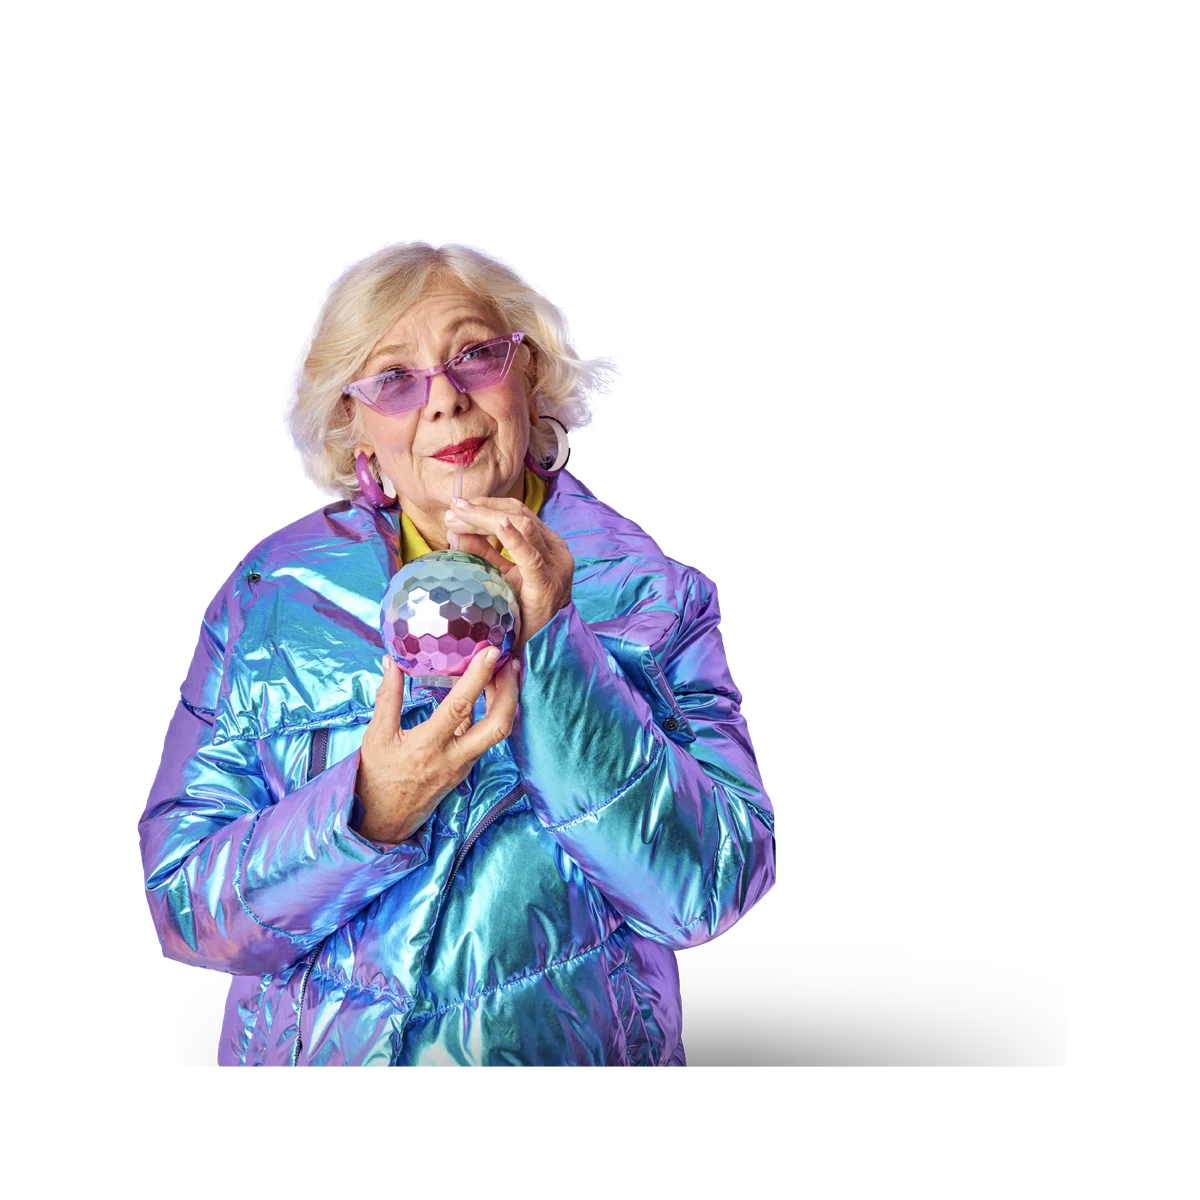 older blonde lady with colorful holographic jacket and personal details in background